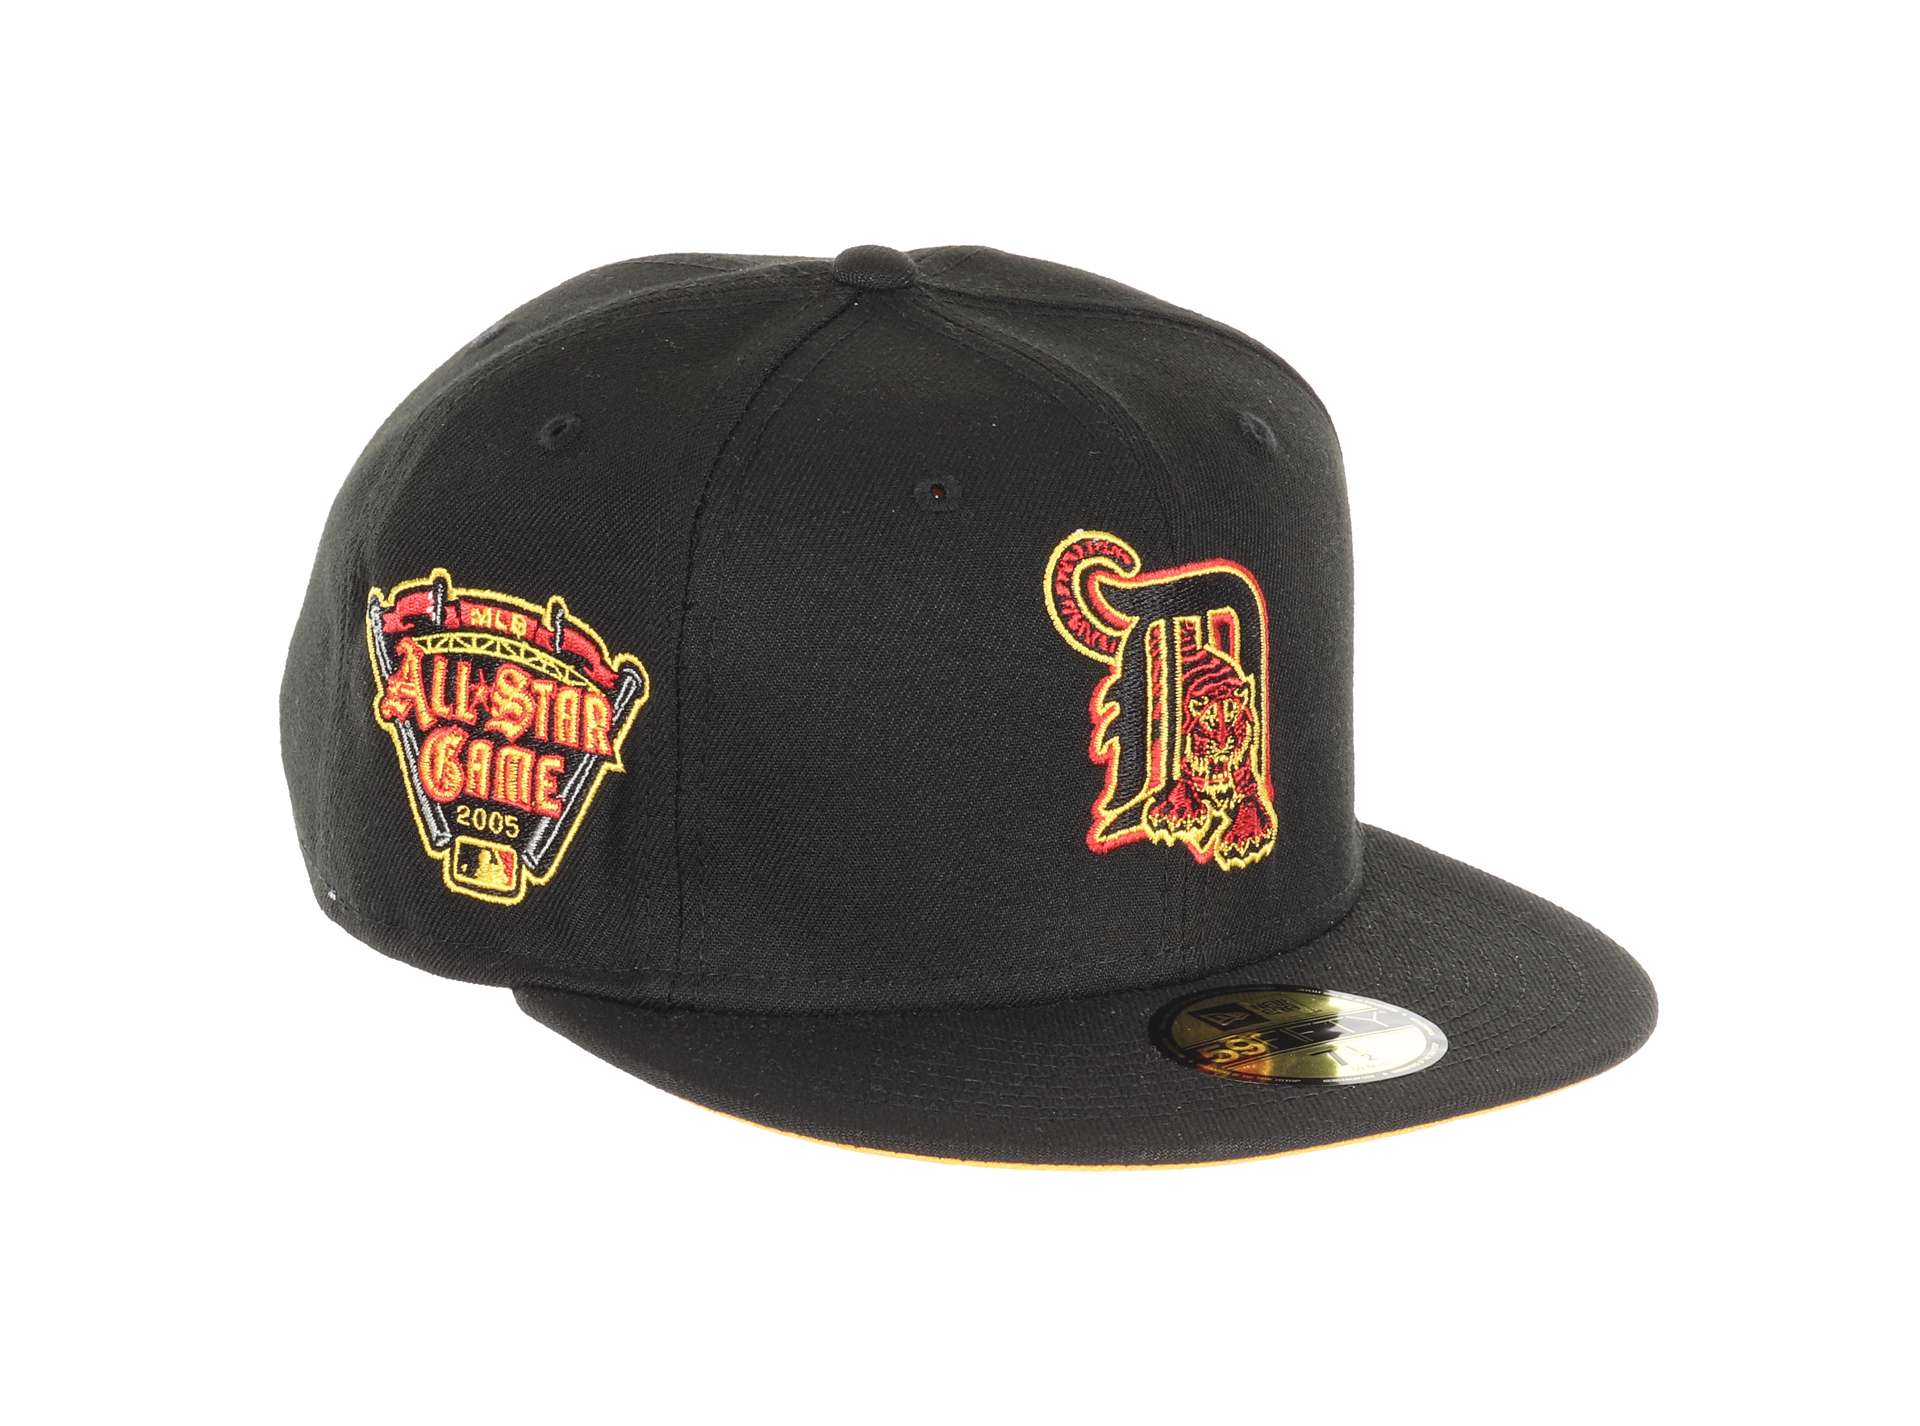 Detroit Tigers MLB Cooperstown All-Star Game 2005 Sidepatch Black 59Fifty Basecap New Era